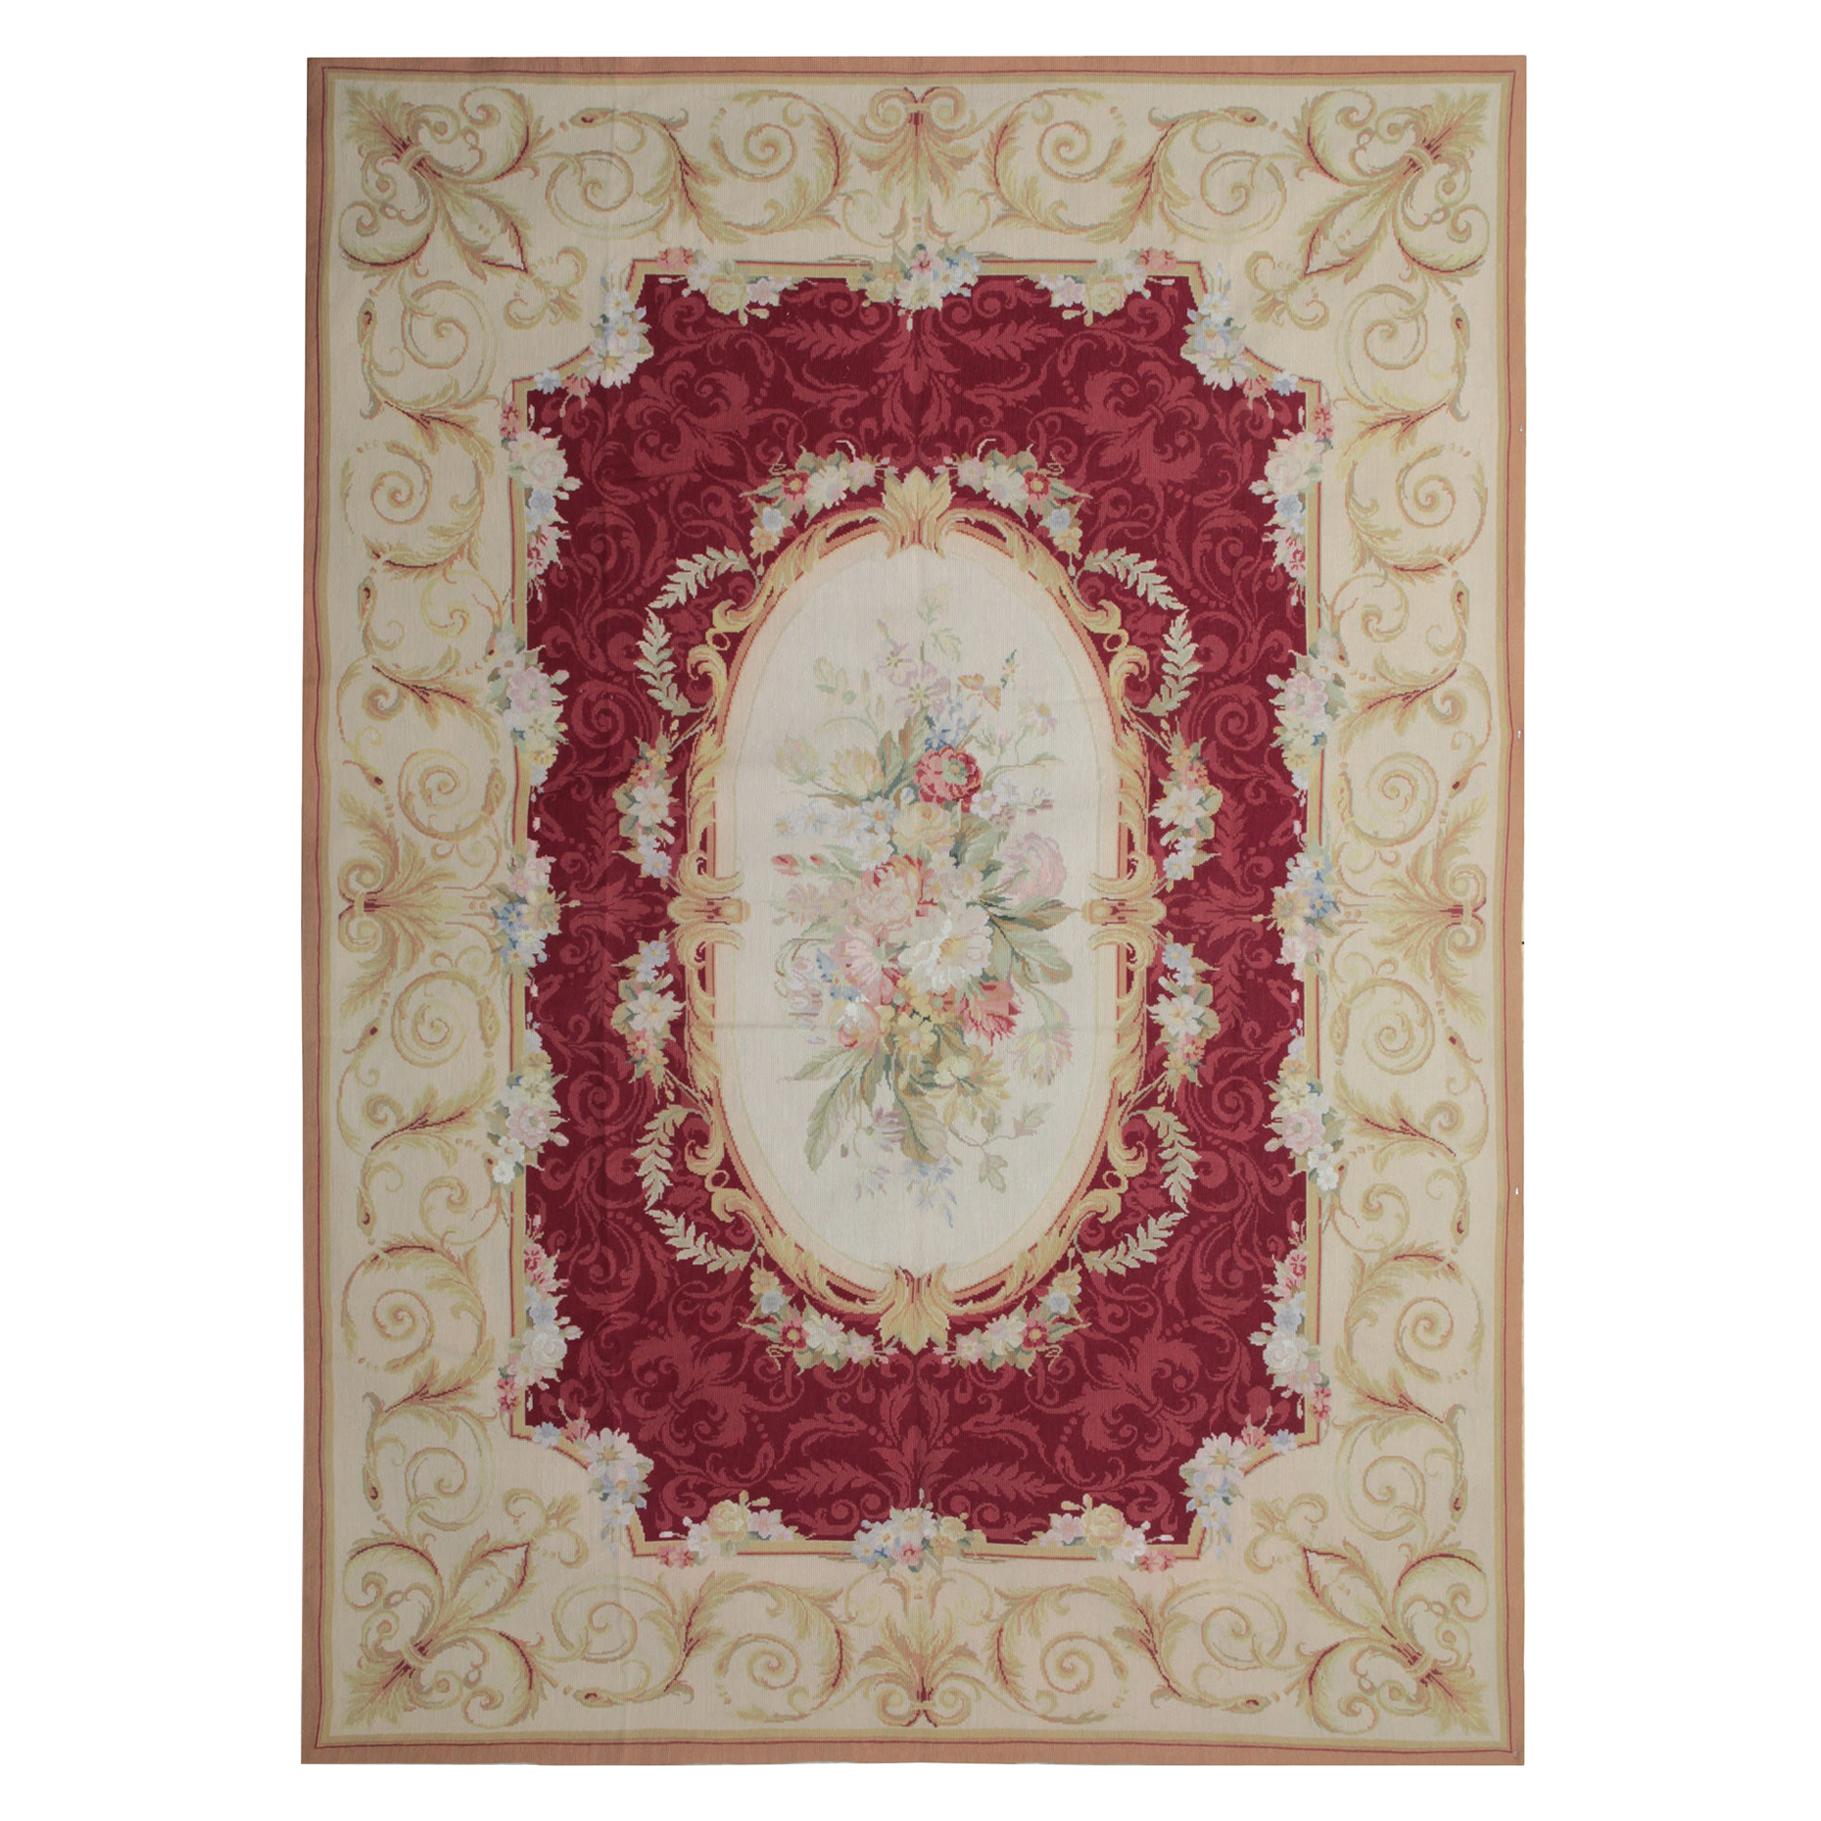 Vintage Aubusson Style Needlepoint Rug, Handmade Carpet Tapestry Wall Hanging